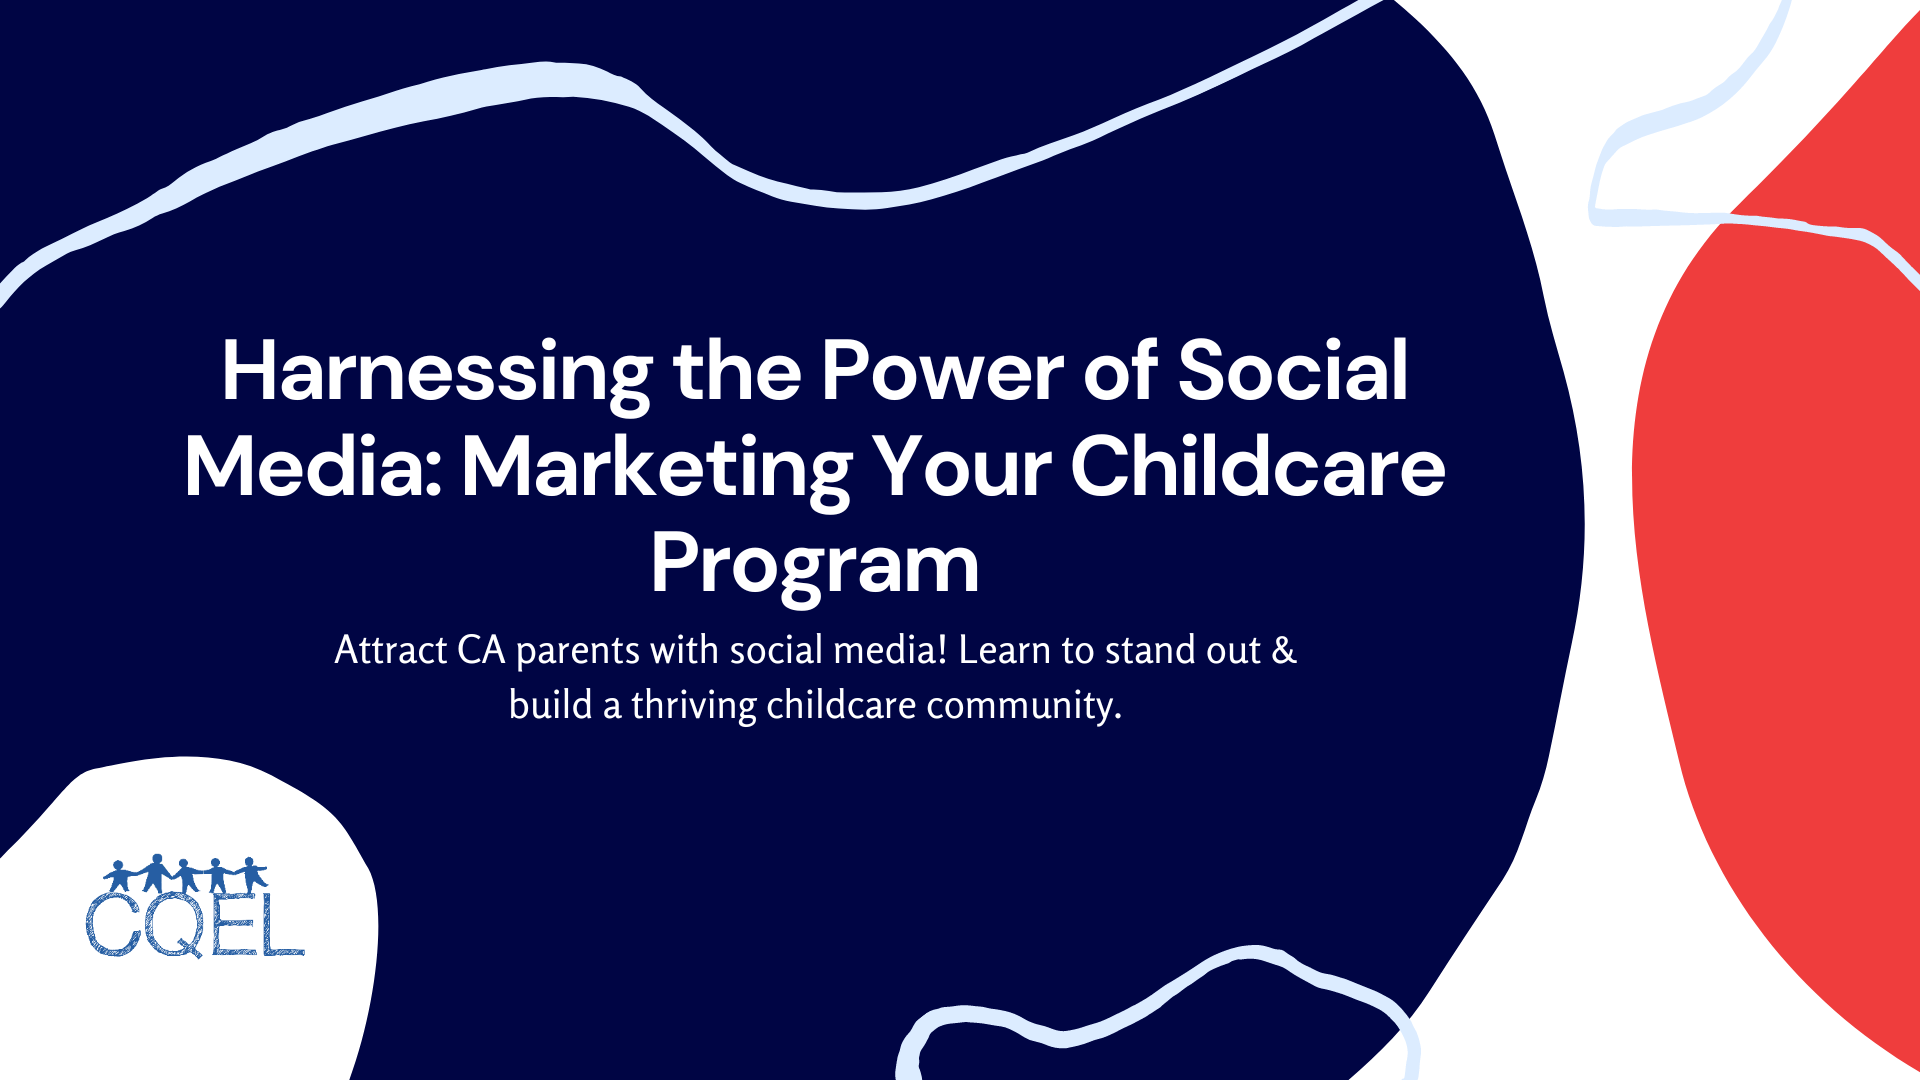 Harnessing the Power of Social Media: Marketing Your Childcare Program